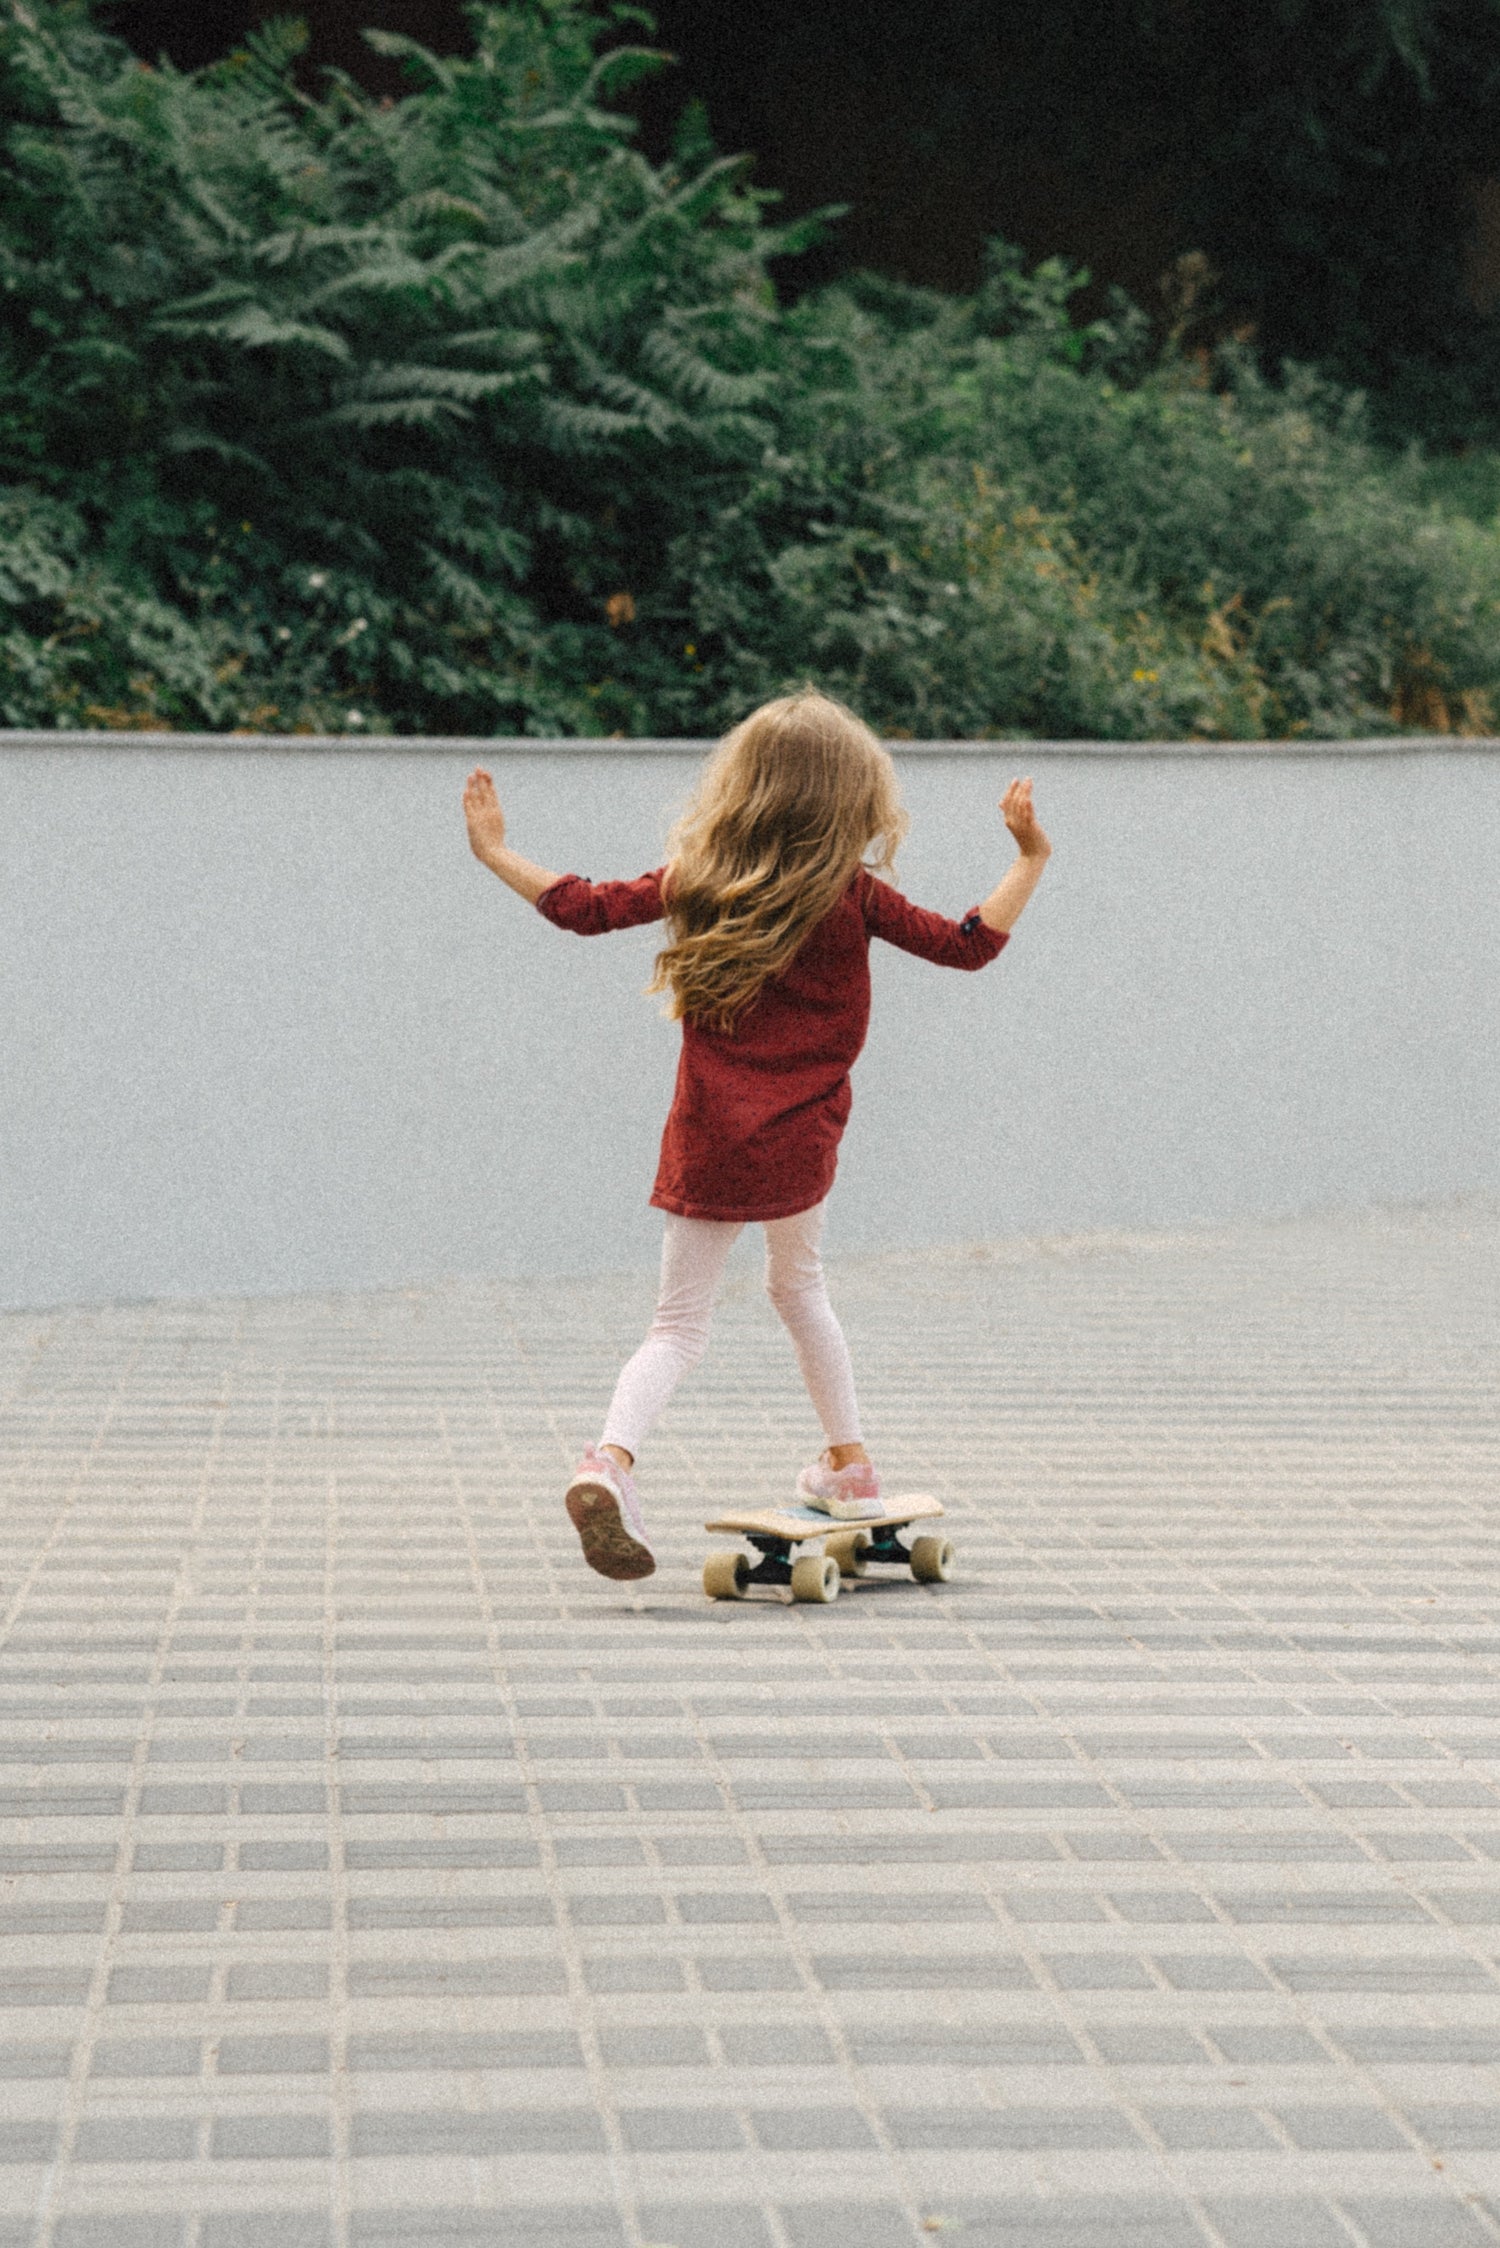 Best Skateboards For 7 Year Old [All You Need To Know]